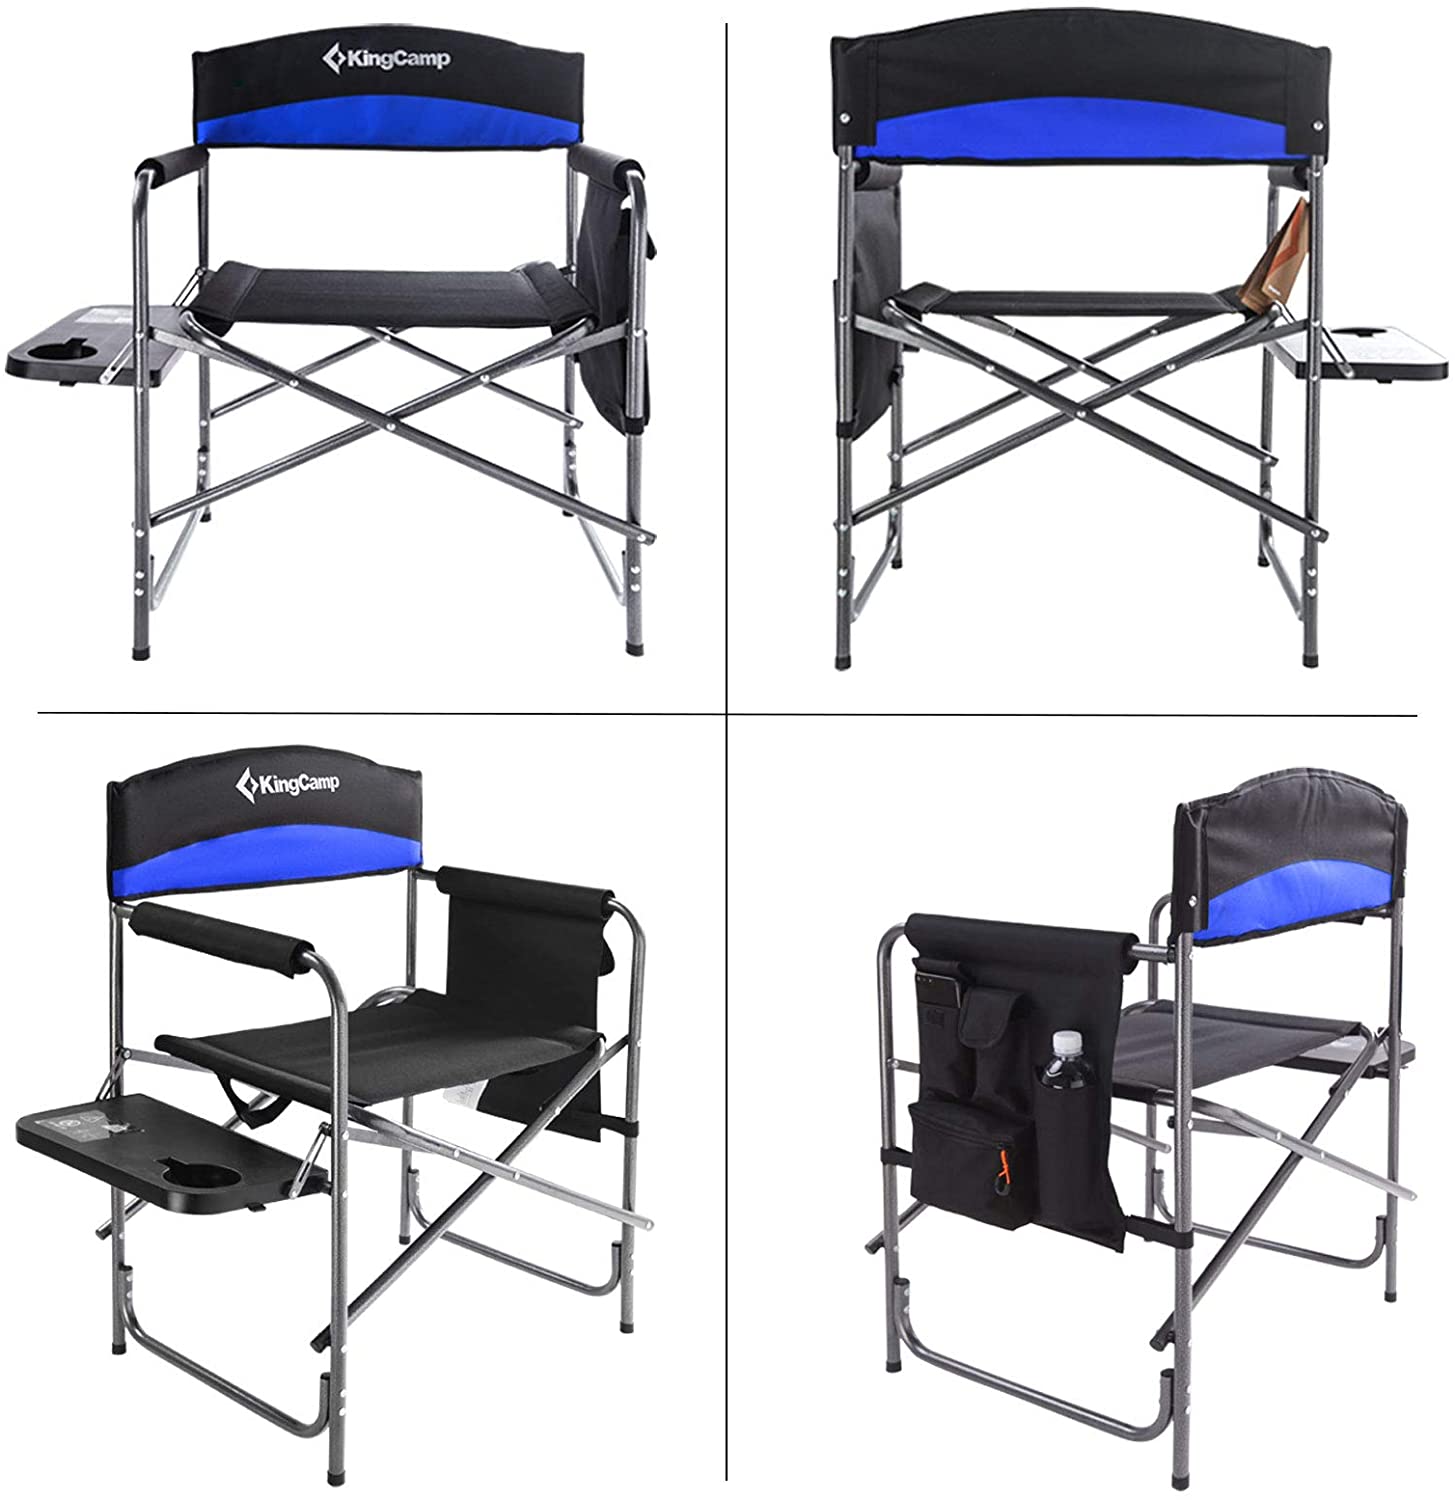 KingCamp Oversize Padded Seat Chair